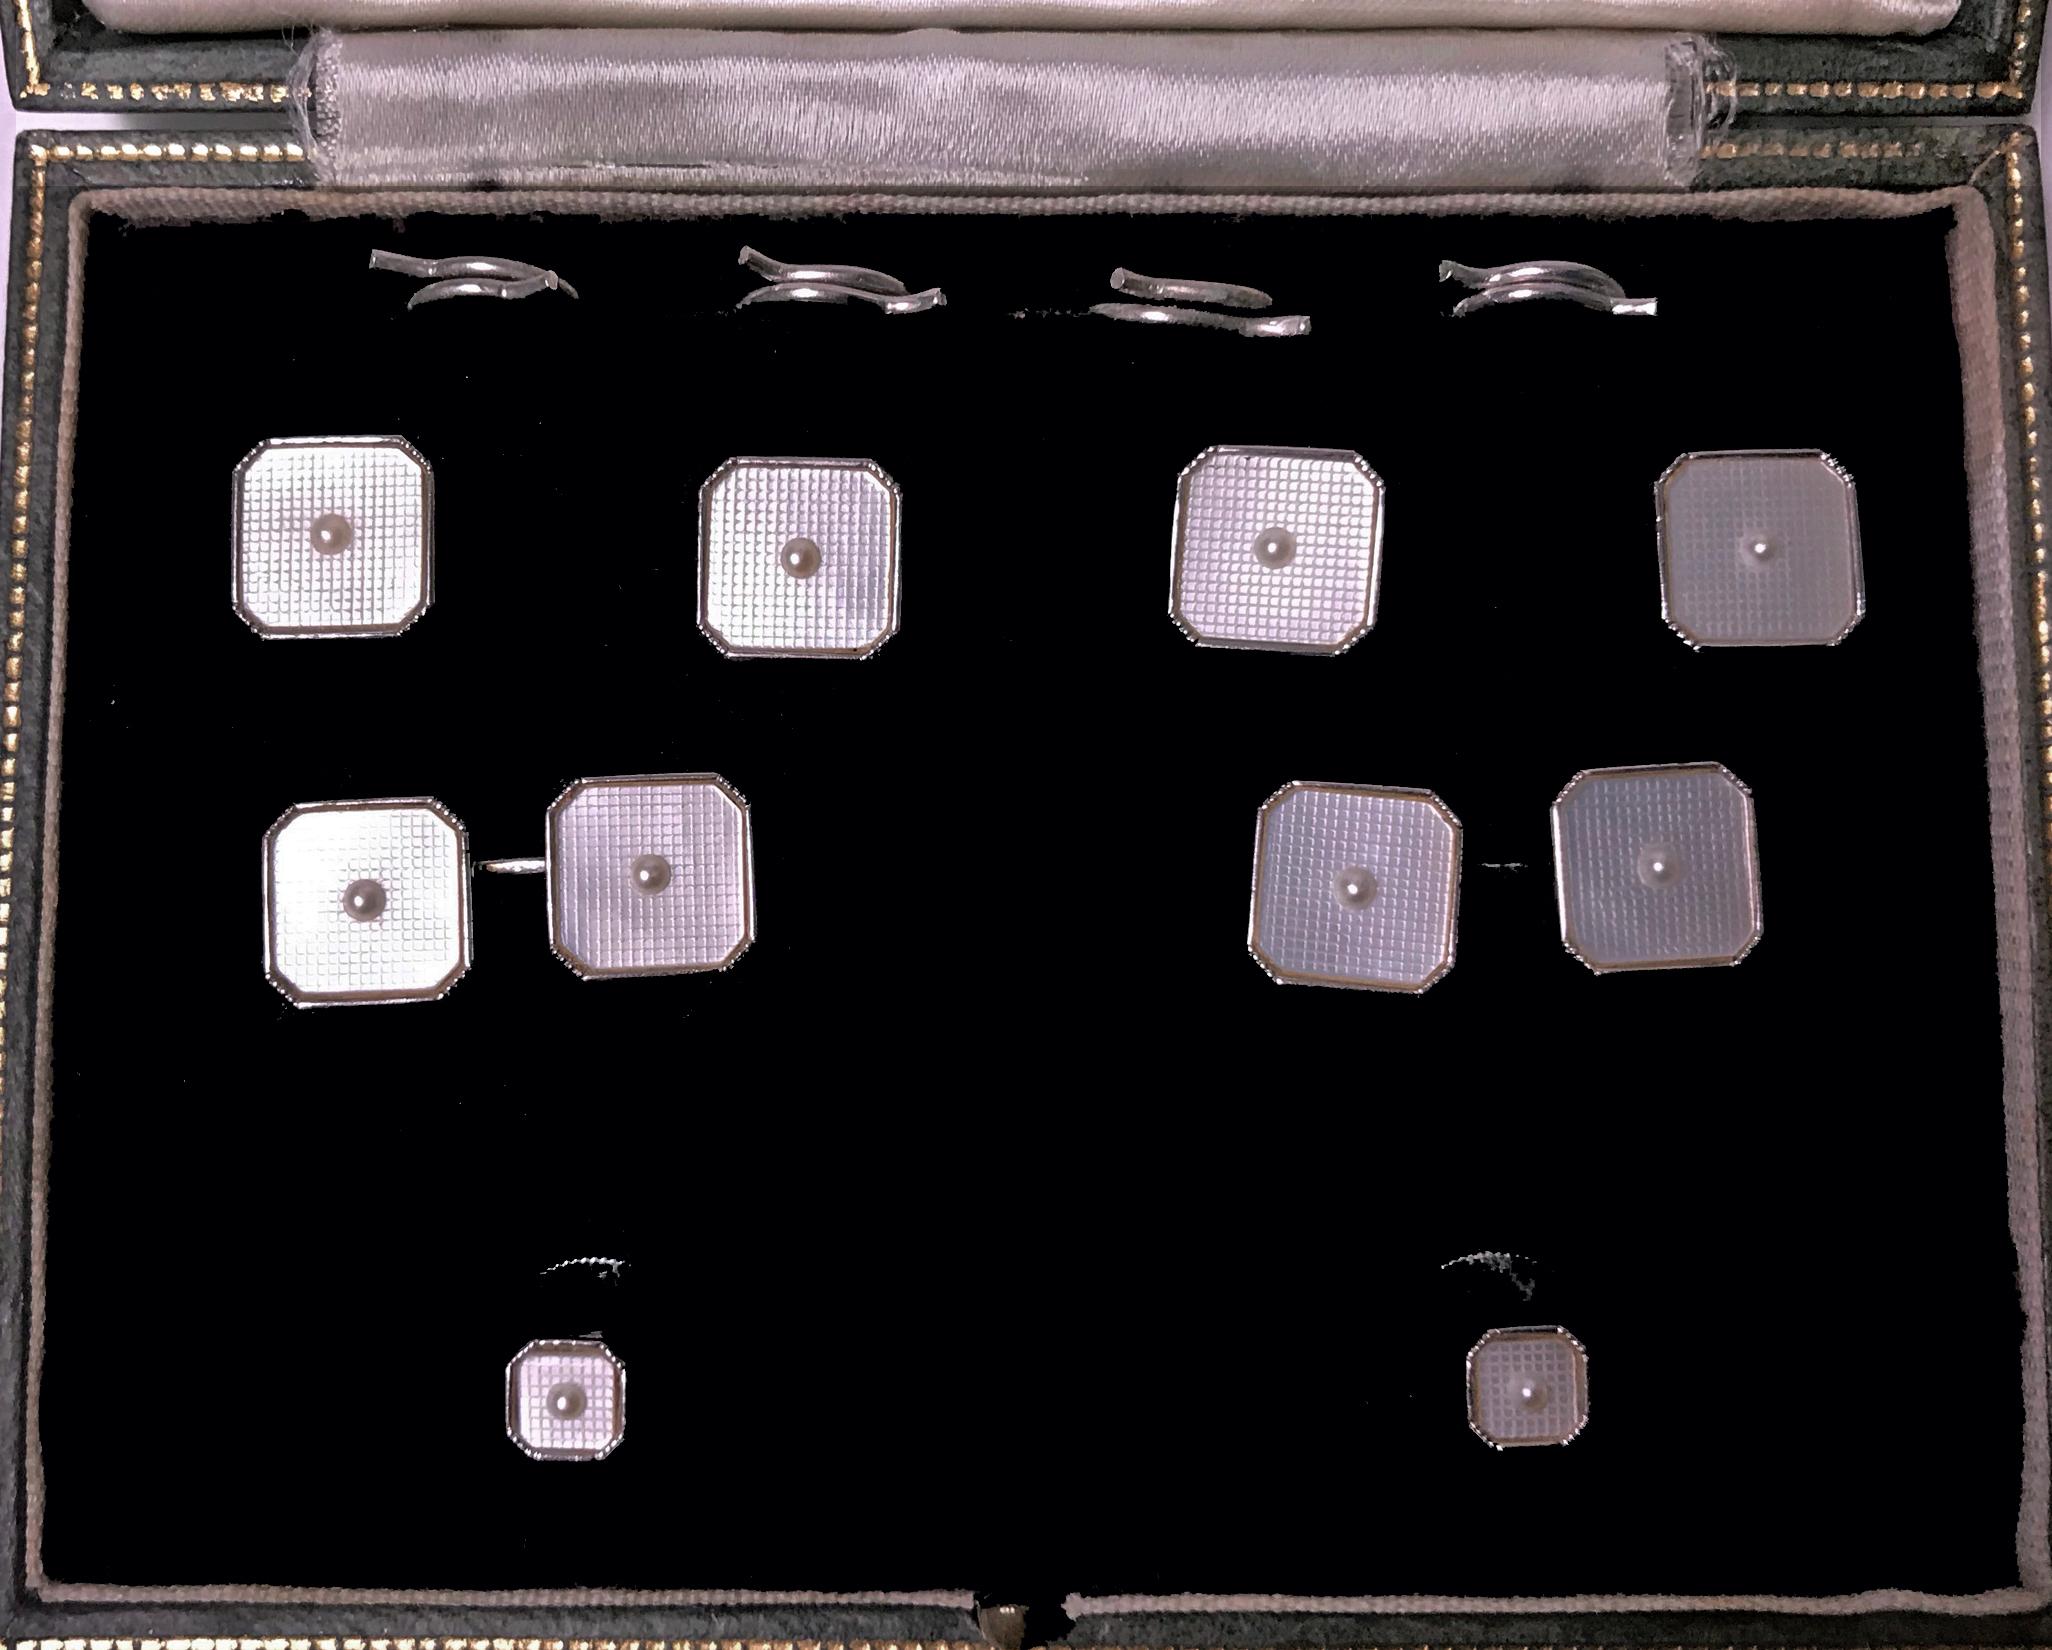 Mother of Pearl, Pearl and White Gold Tuxedo Cufflinks Dress Set, English, C.1930. The set comprising pair of Cufflinks, four buttons and pair of collar studs. Each square shape centering a small pearl on engine turned design mother of pearl,